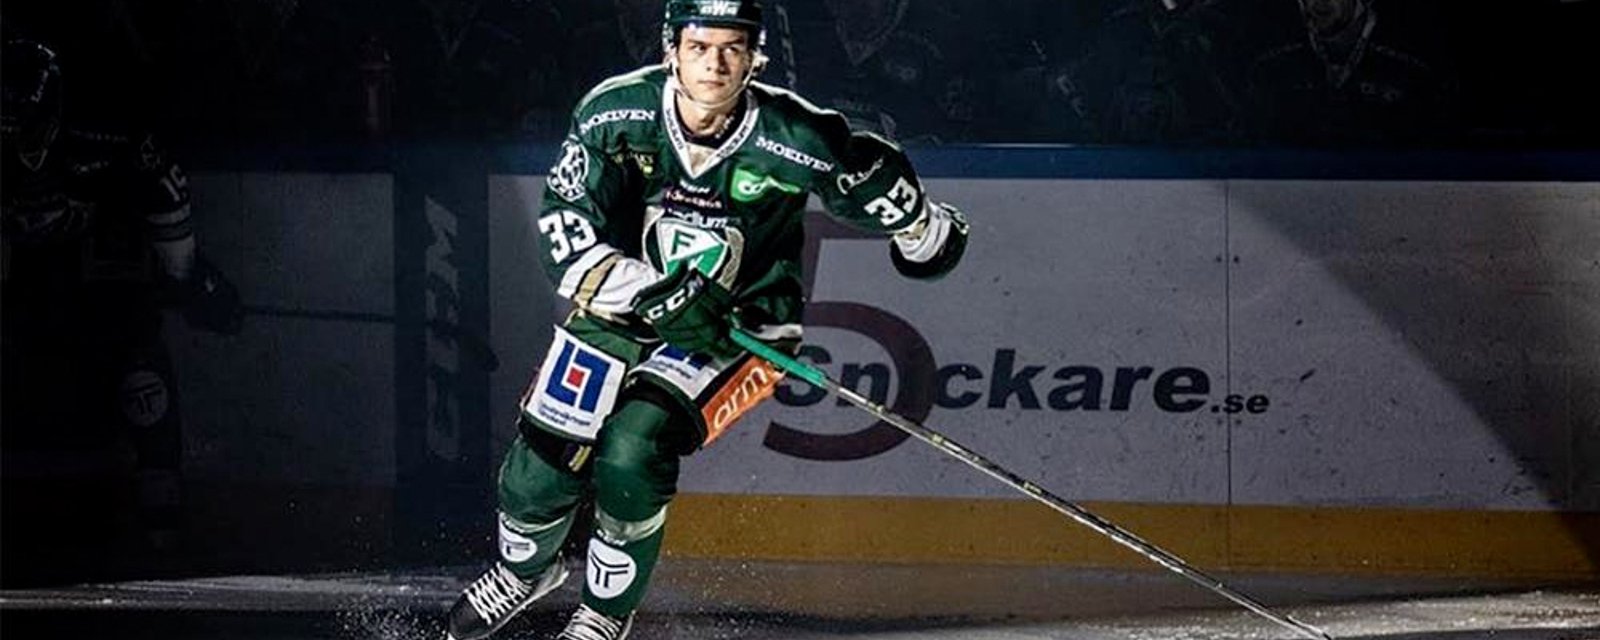 Red Wings sign top prospect Johansson to three year contract